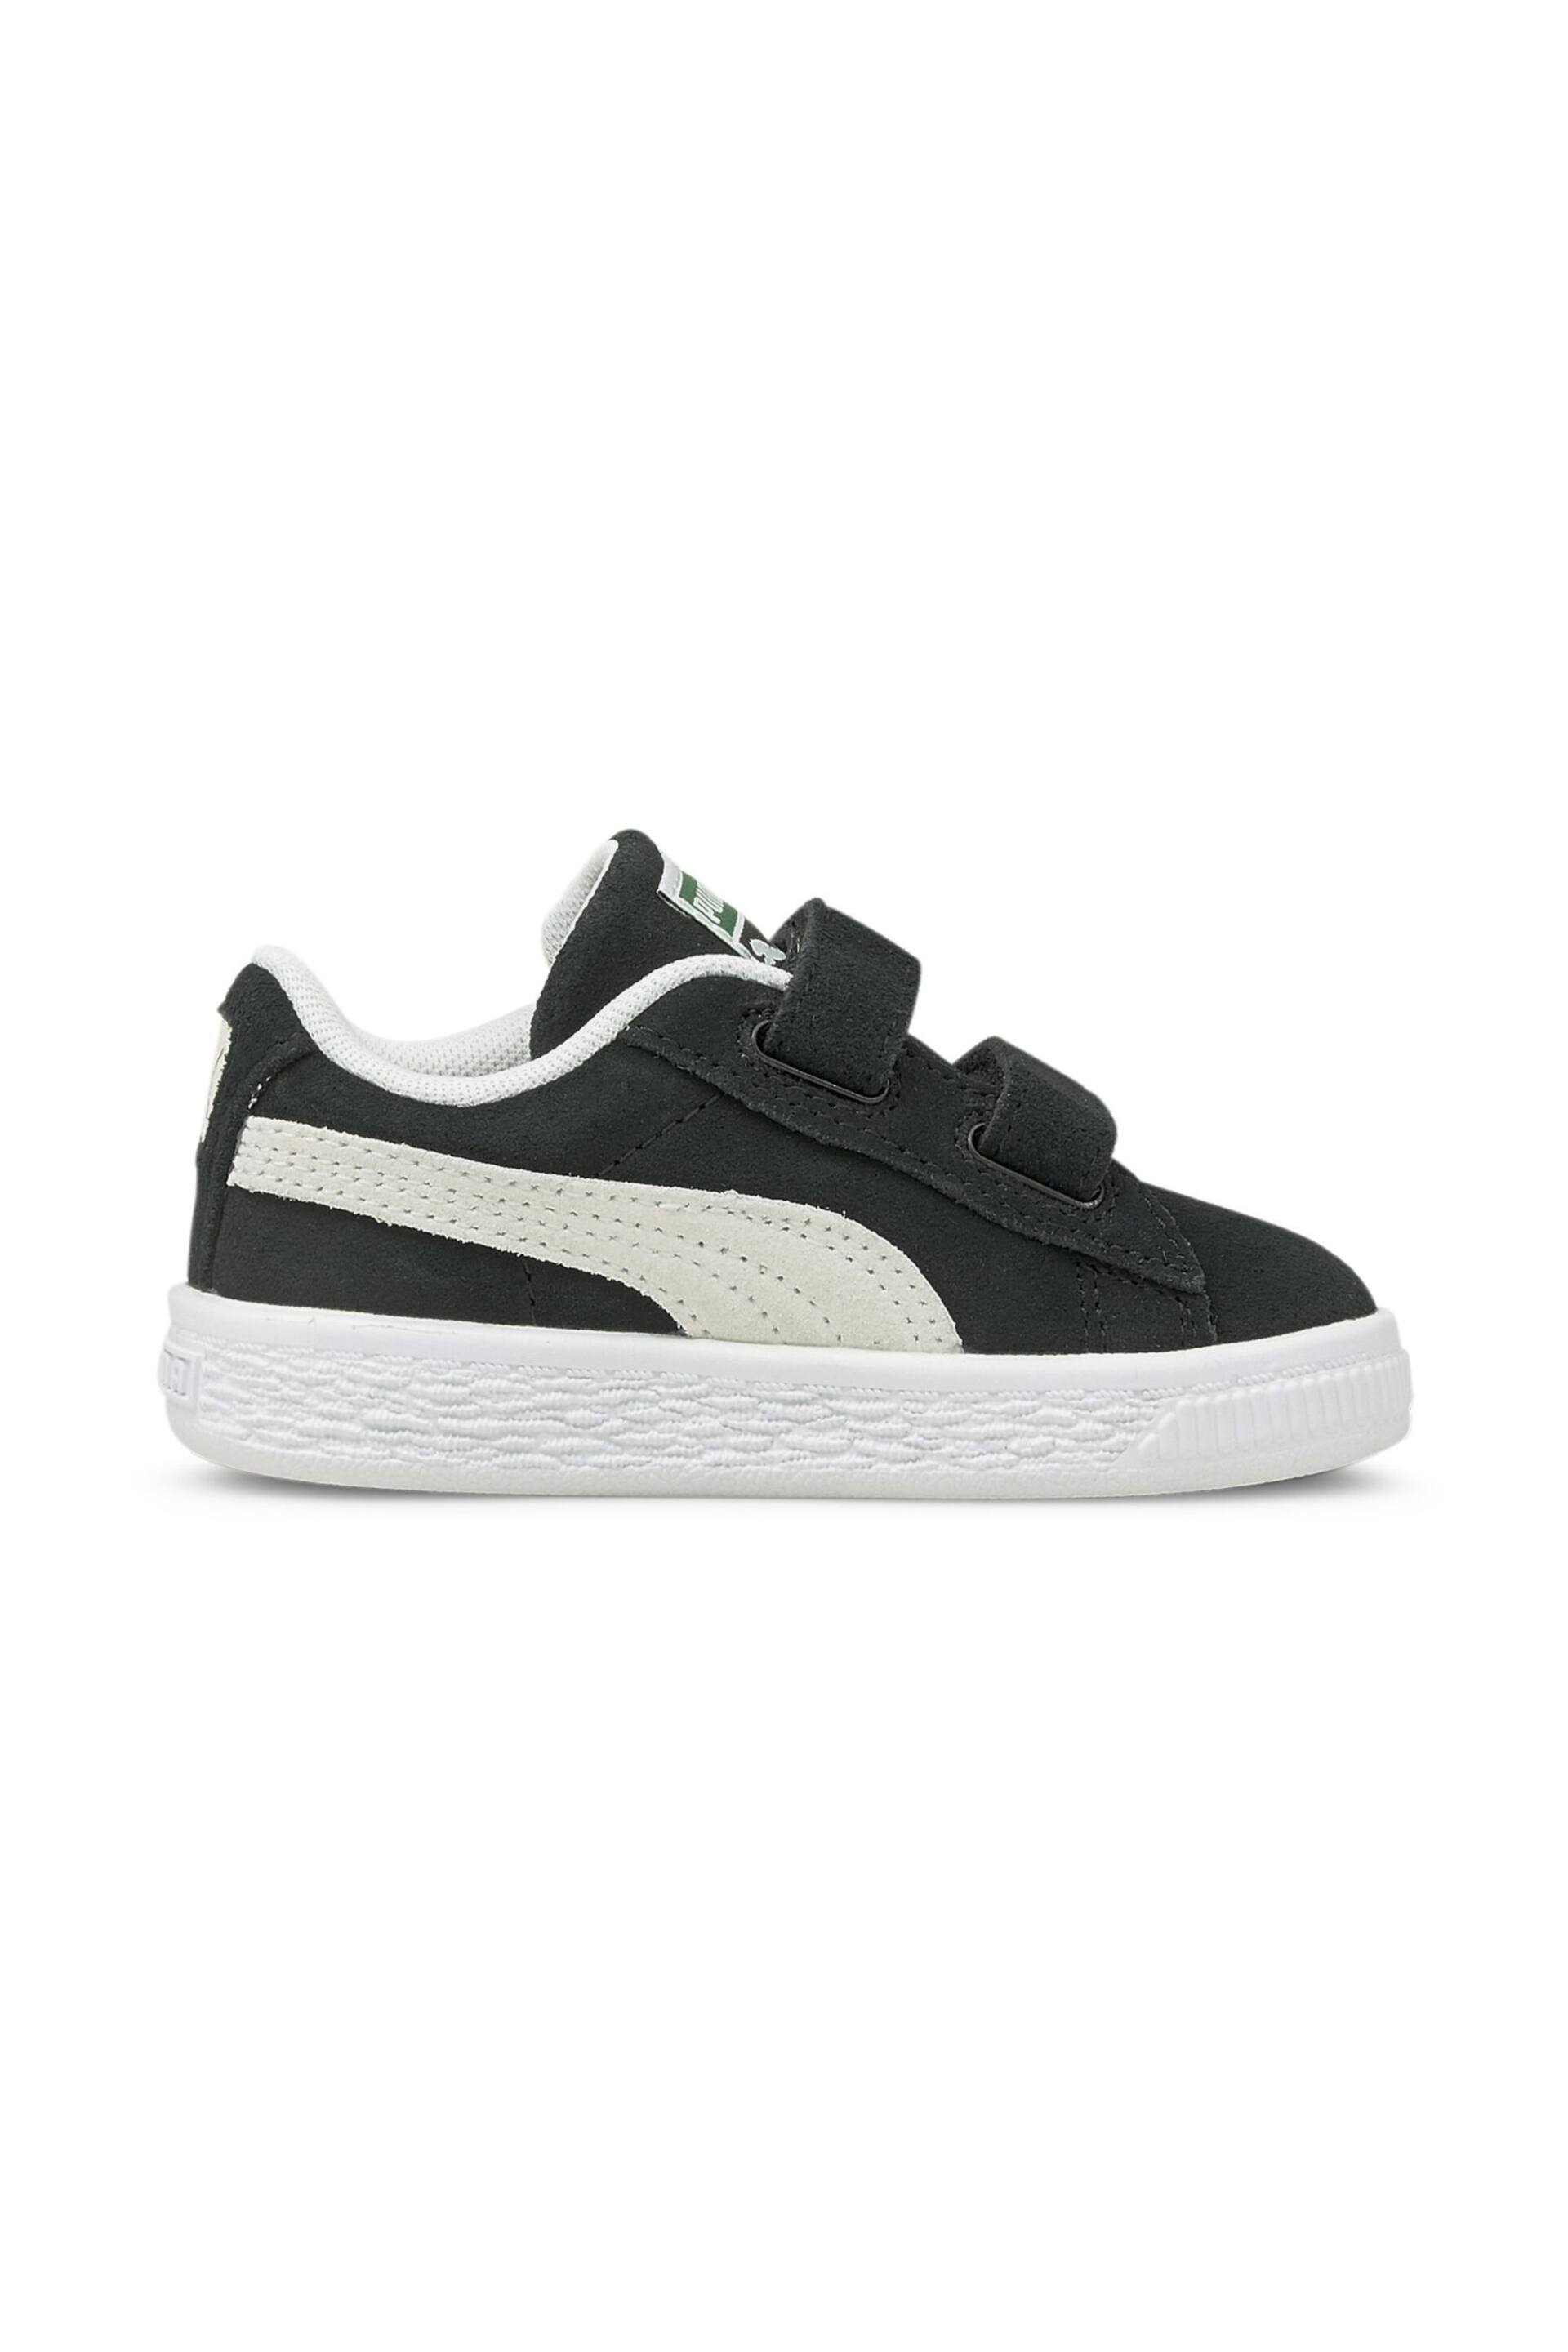 Puma Black Babies Suede Classic XXI Trainers - Image 8 of 11